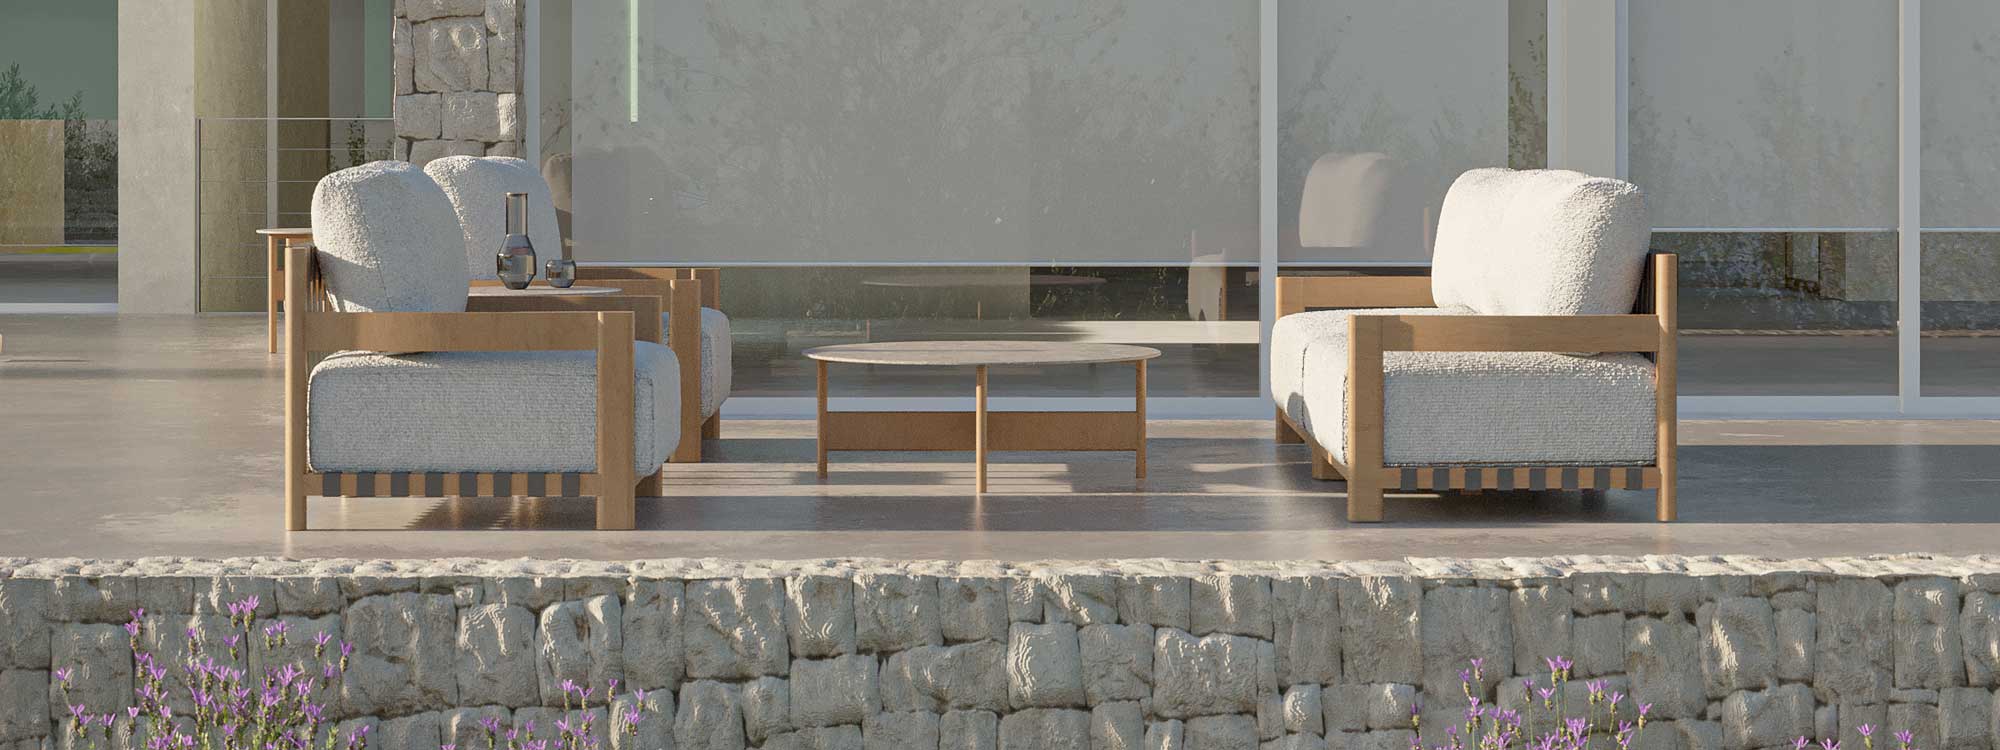 Image of Oiside Natura iroko garden sofa and lounge chairs on a sunny modern terrace